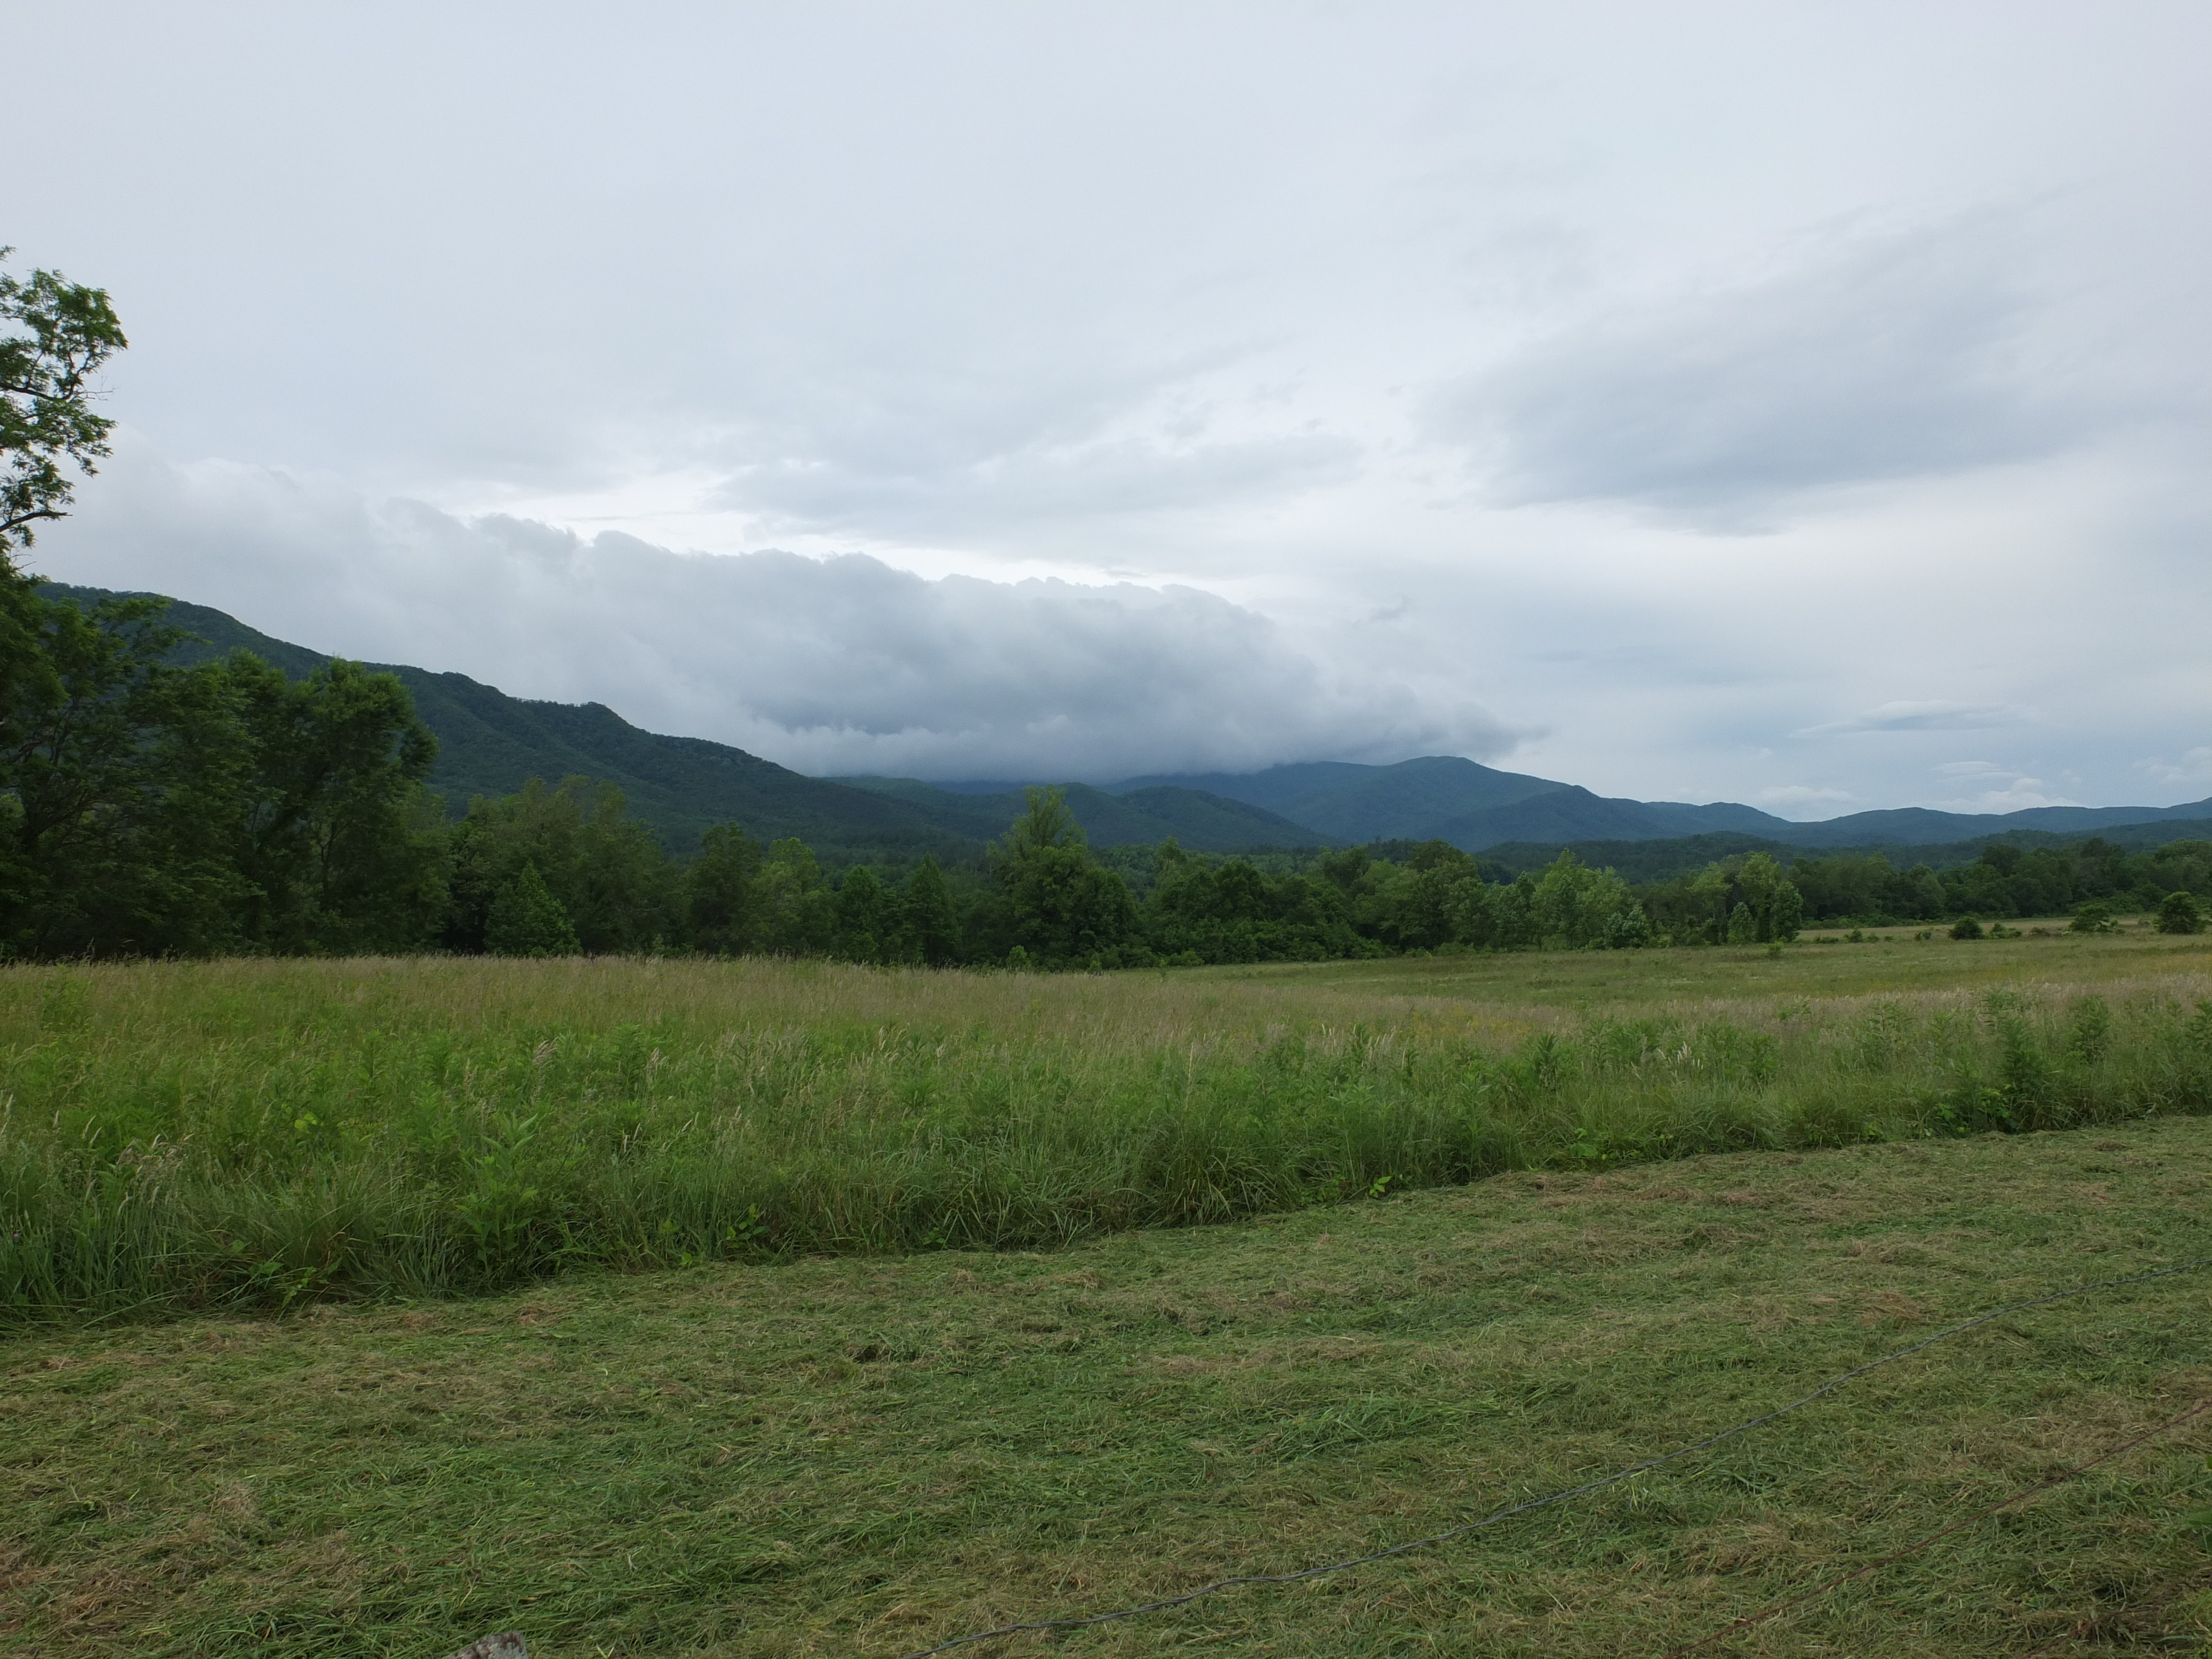 Clouds over the Smoky Mountains in Cades Cove